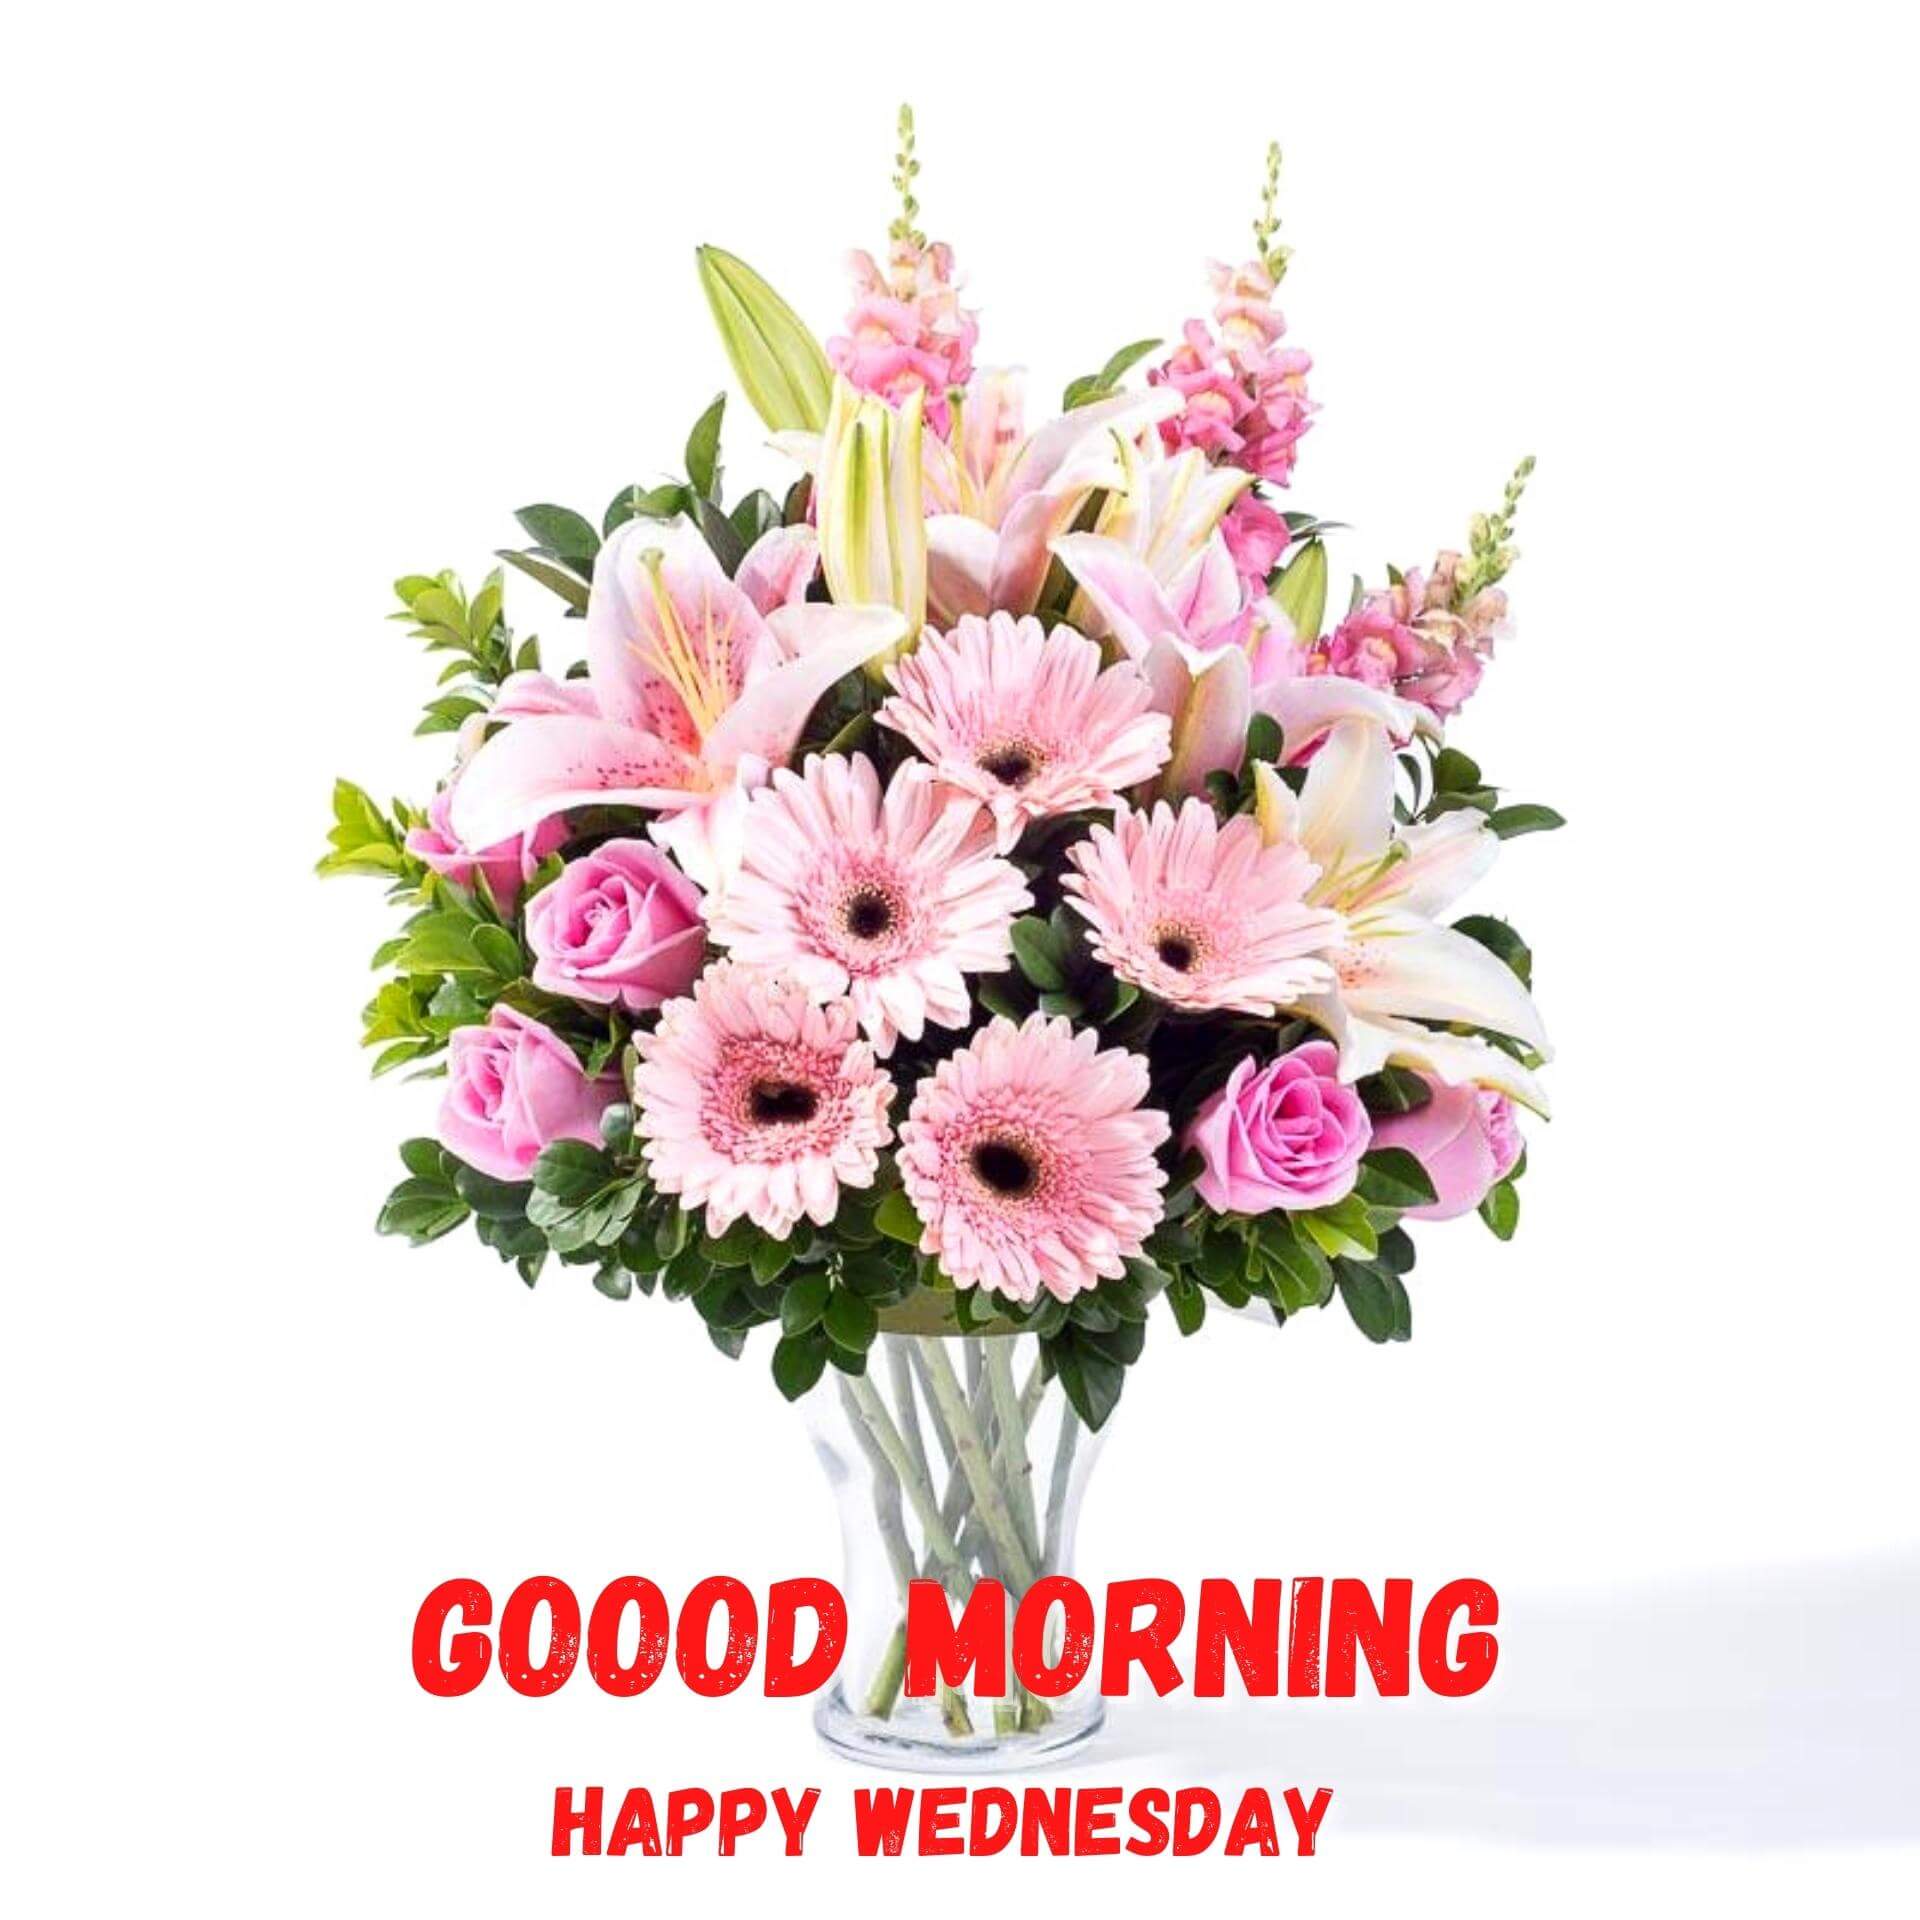 Wednesday good morning Wallpaper Images Download